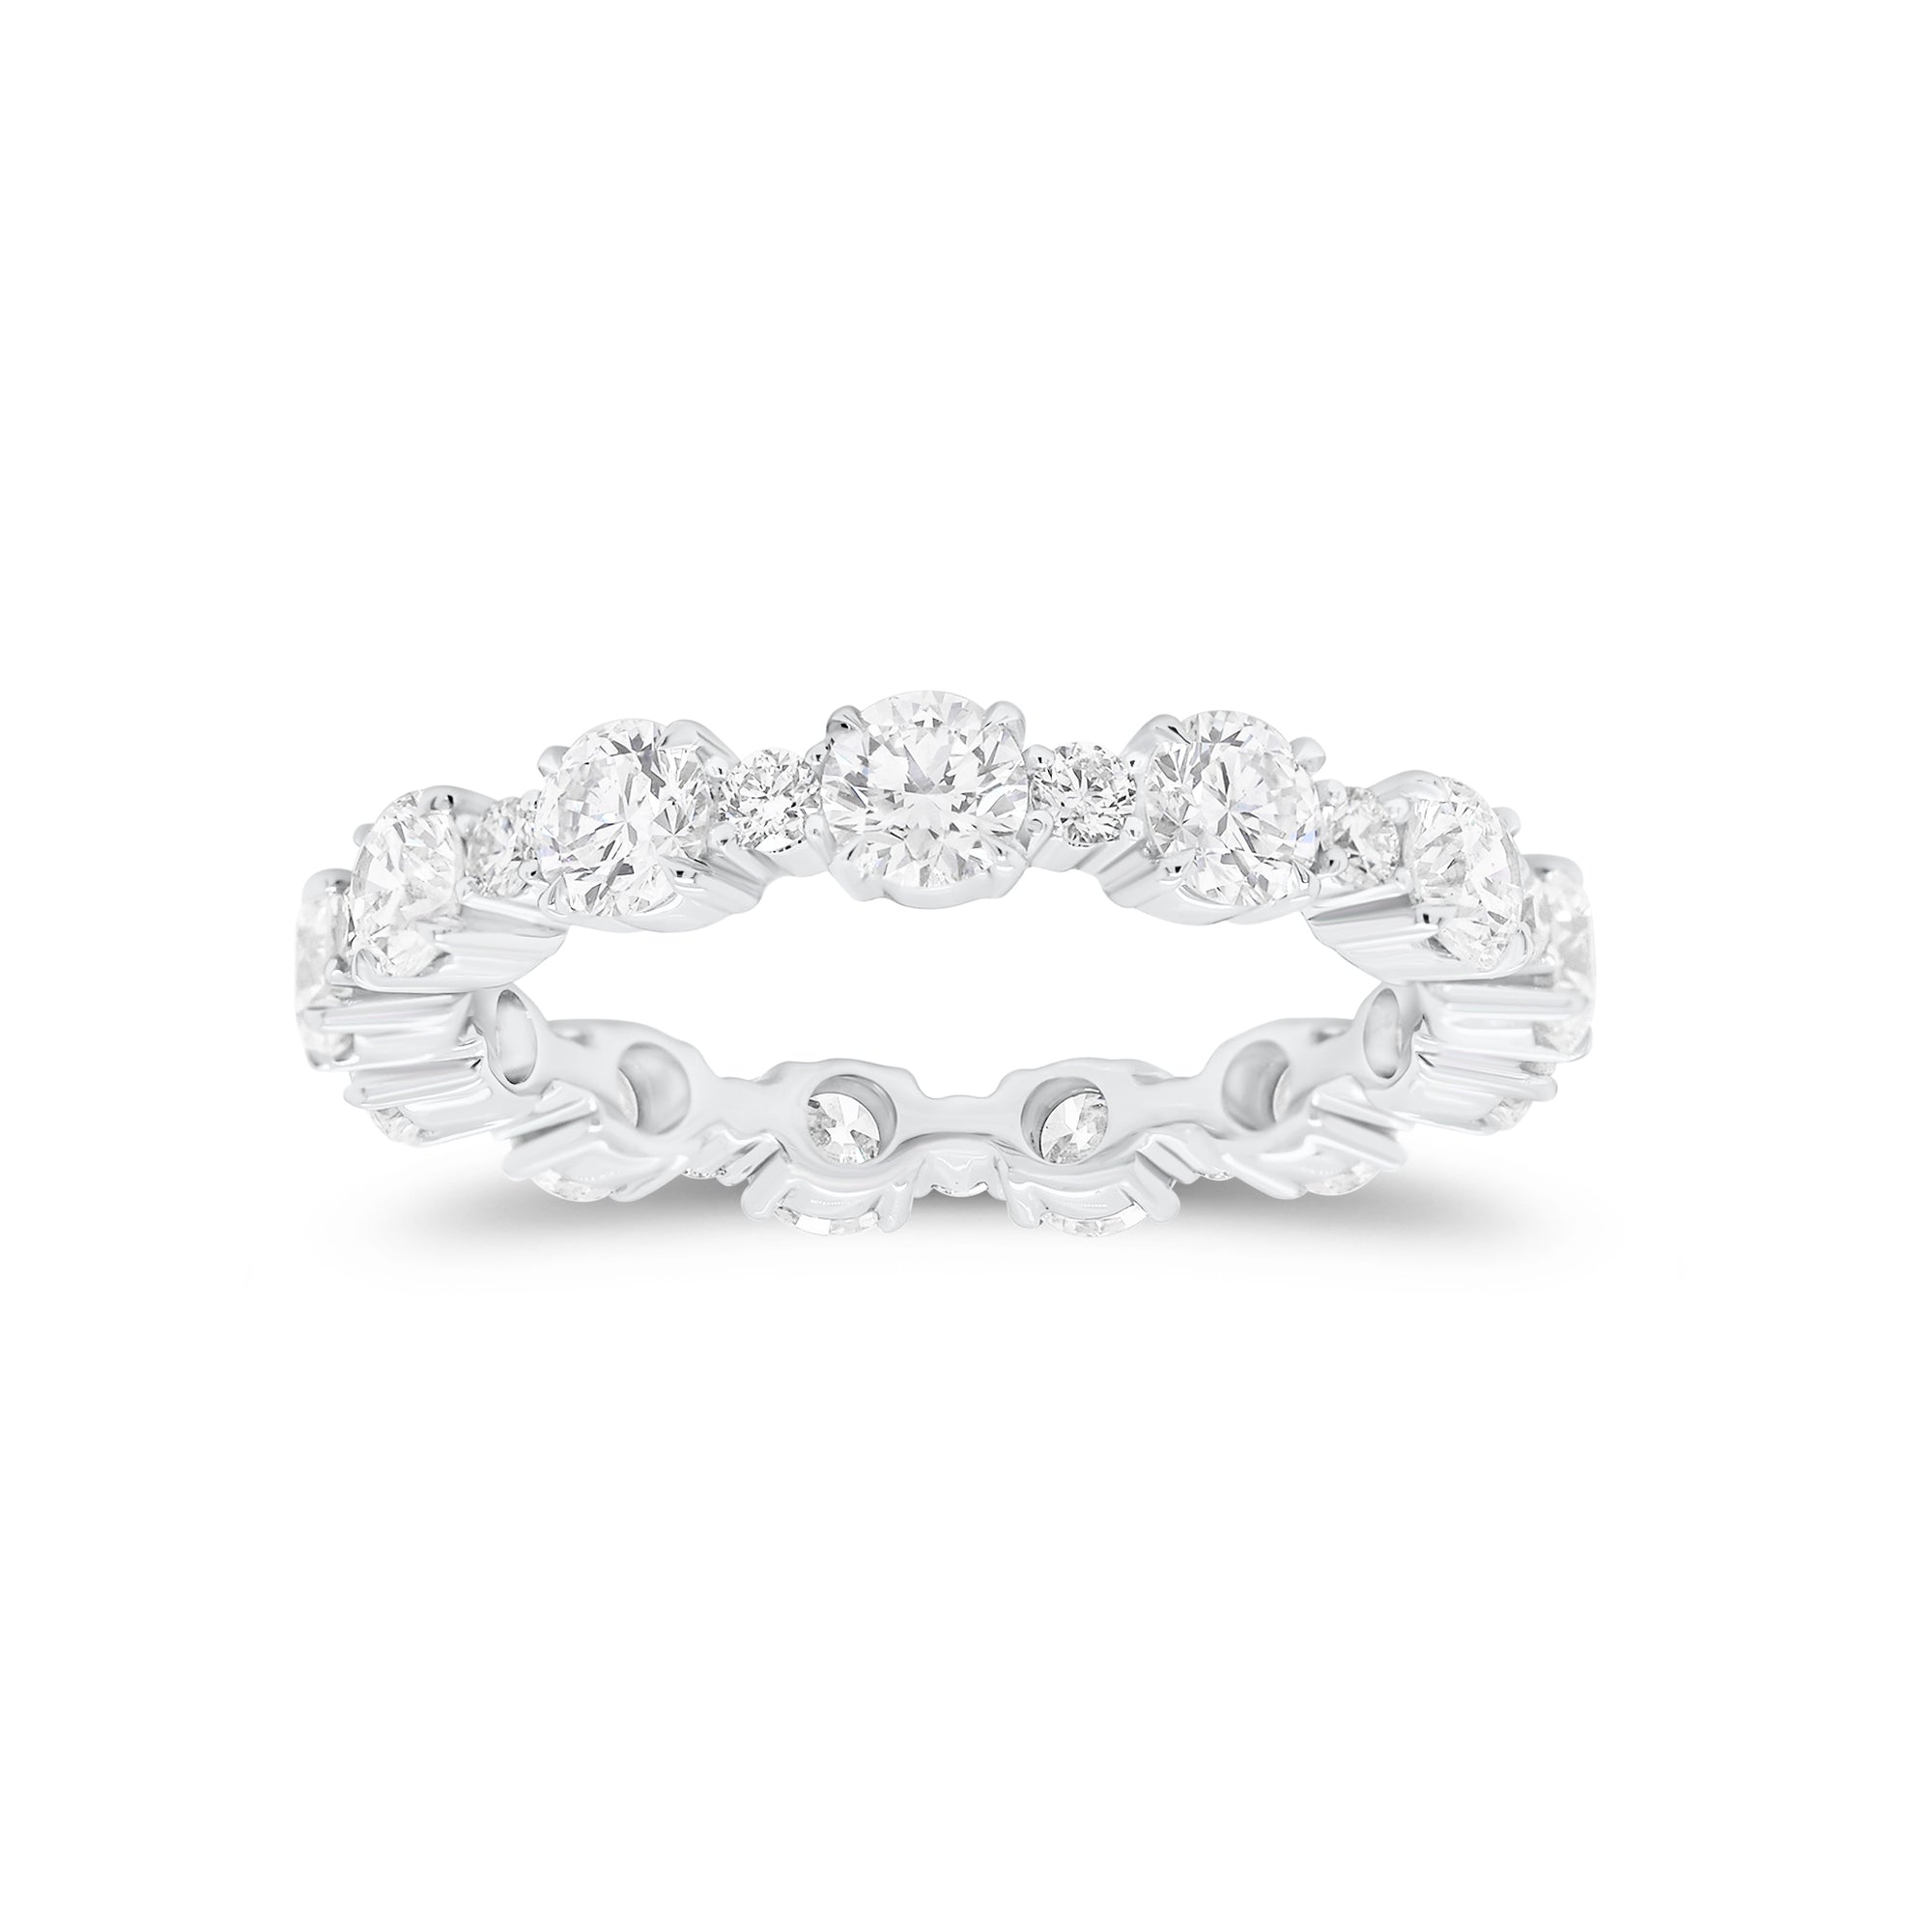 Diamond Eternity Band   -18K gold weighing 3.07 grams  -12 round diamonds totaling 2.13 carats  -12 round diamonds totaling 0.43 carats